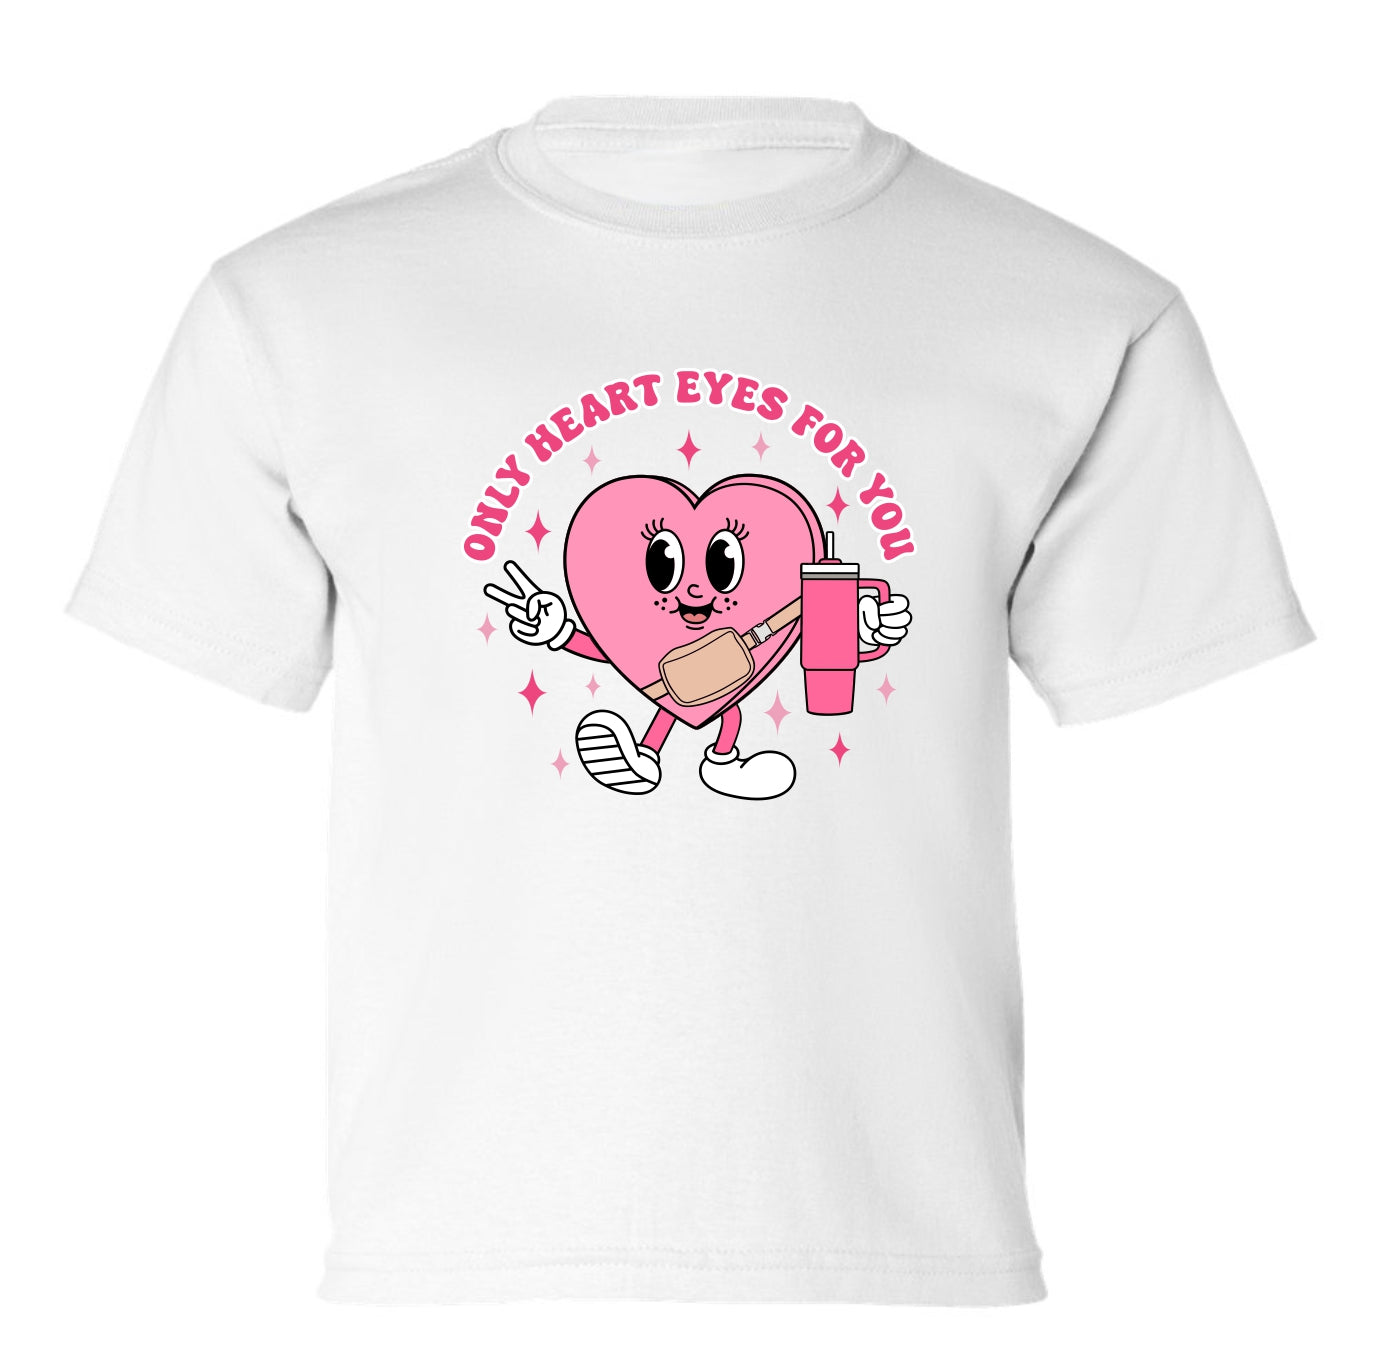 "Only Heart Eyes For You" Toddler/Youth T-Shirt